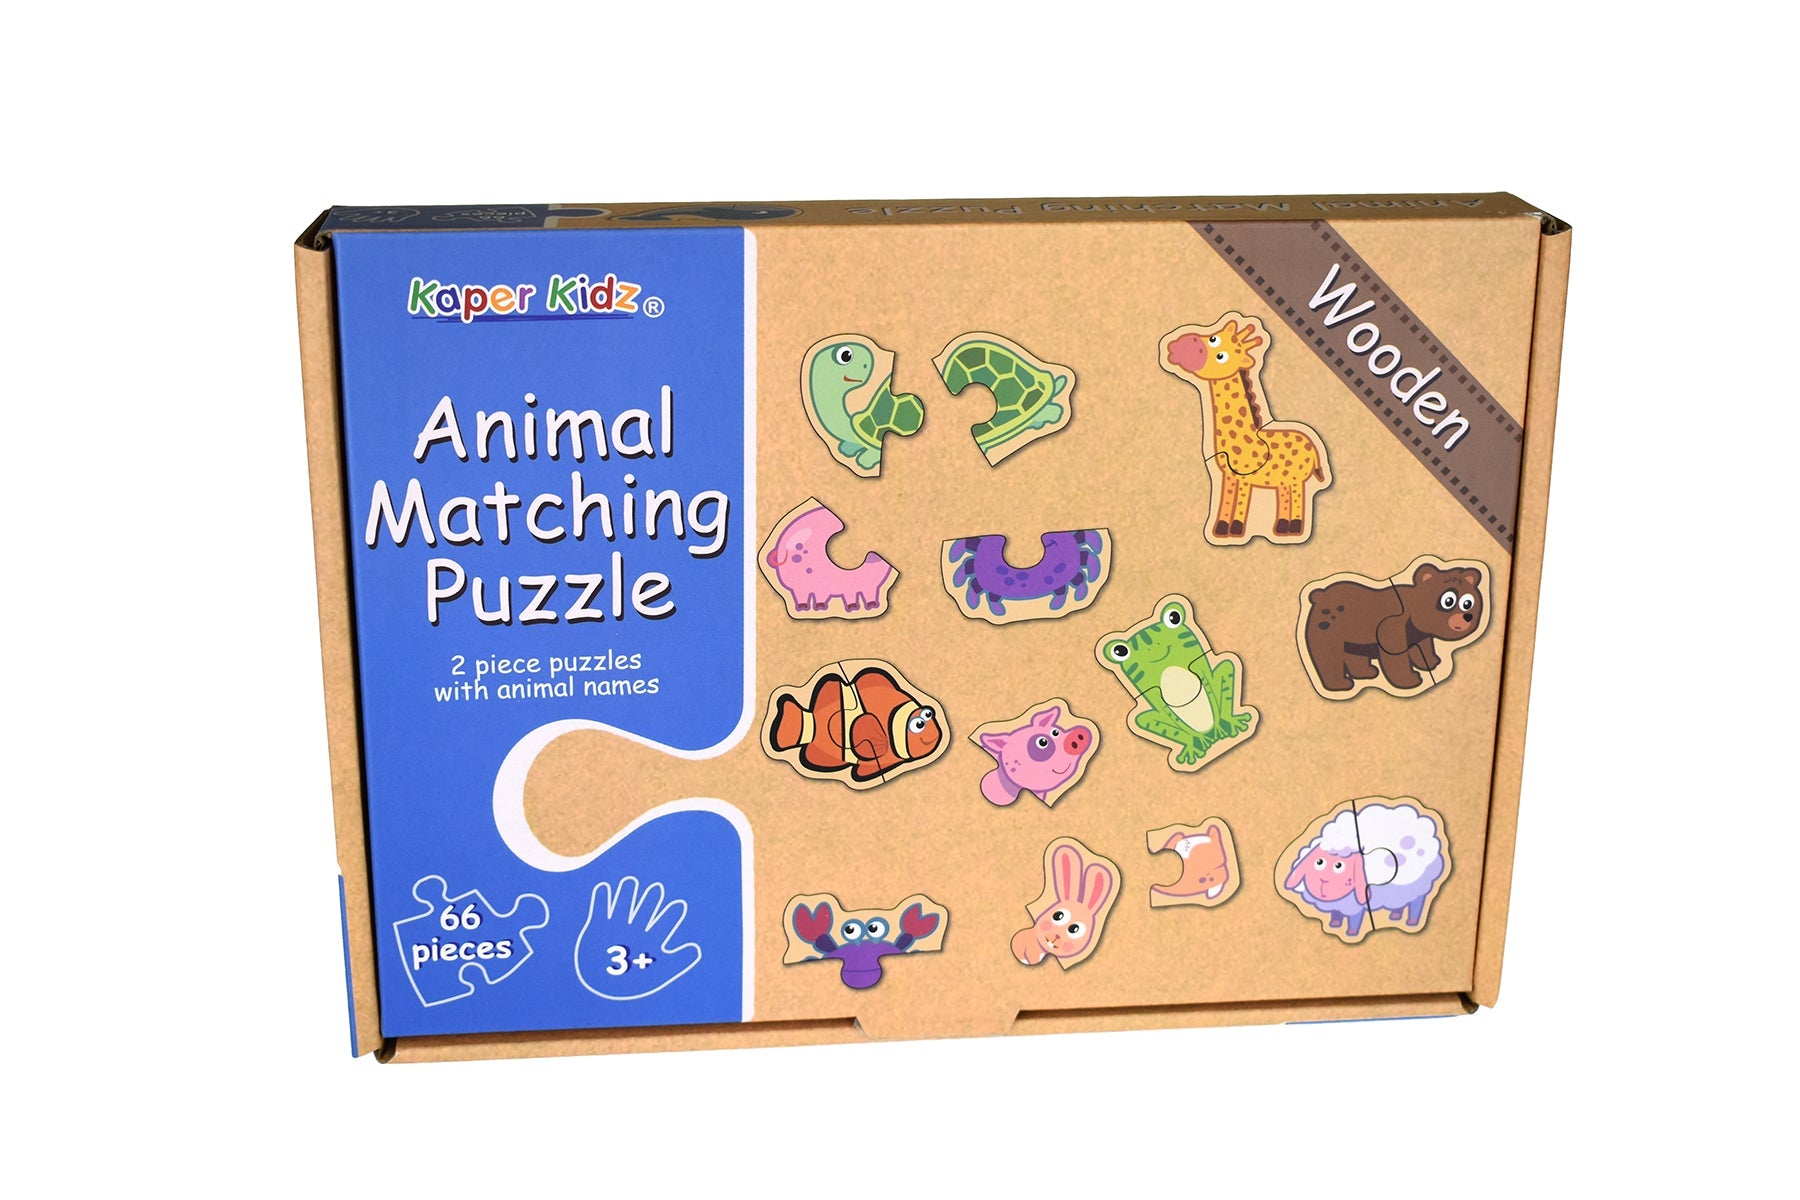 Wooden Animal matching puzzle in box for 3 plus years